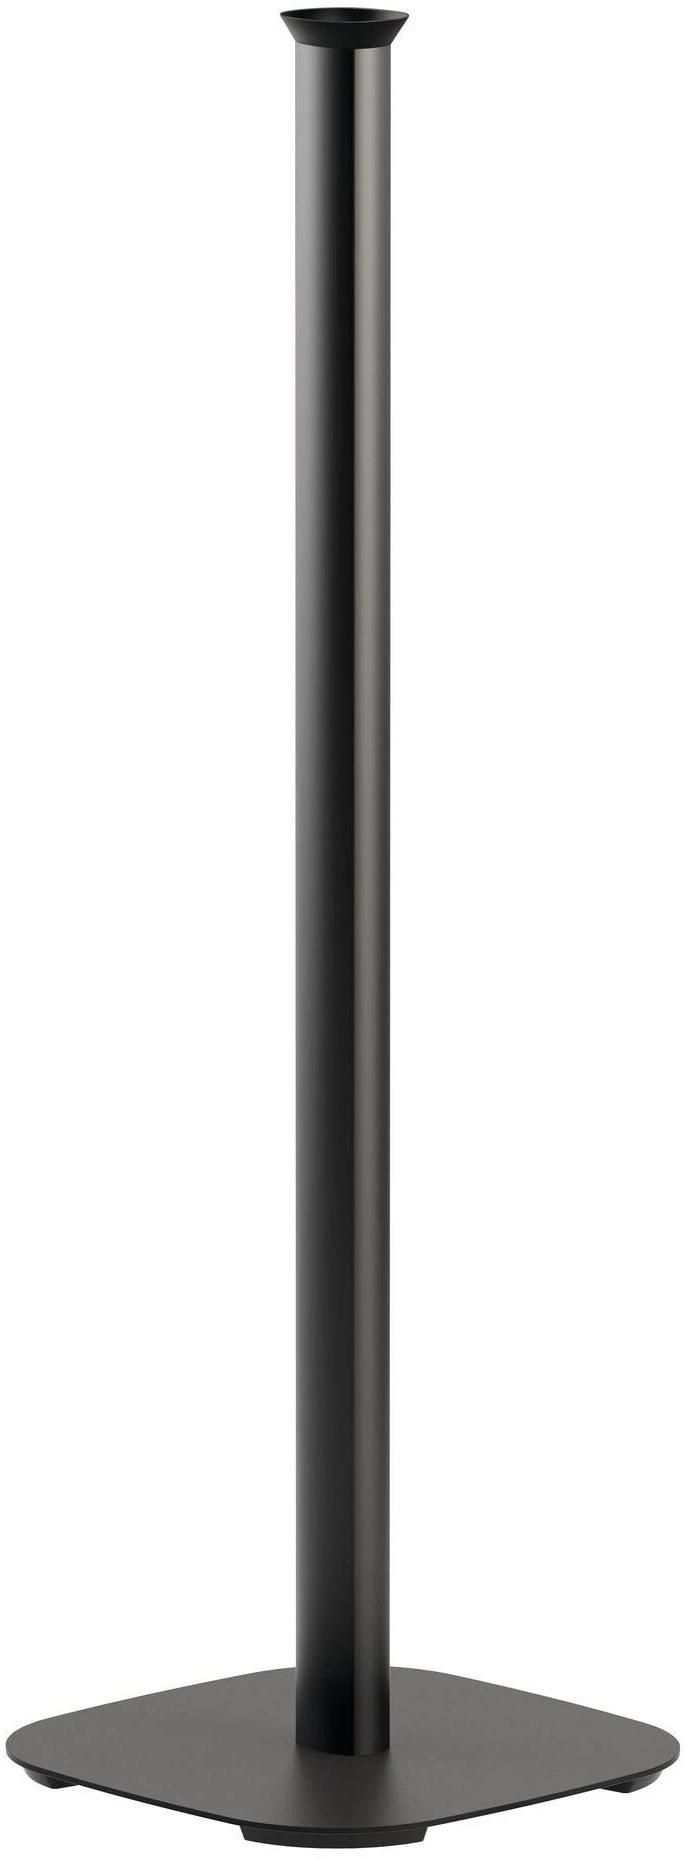 Bowers And Wilkins Formation Flex Stylish High End Design Floor Stand  zoom image